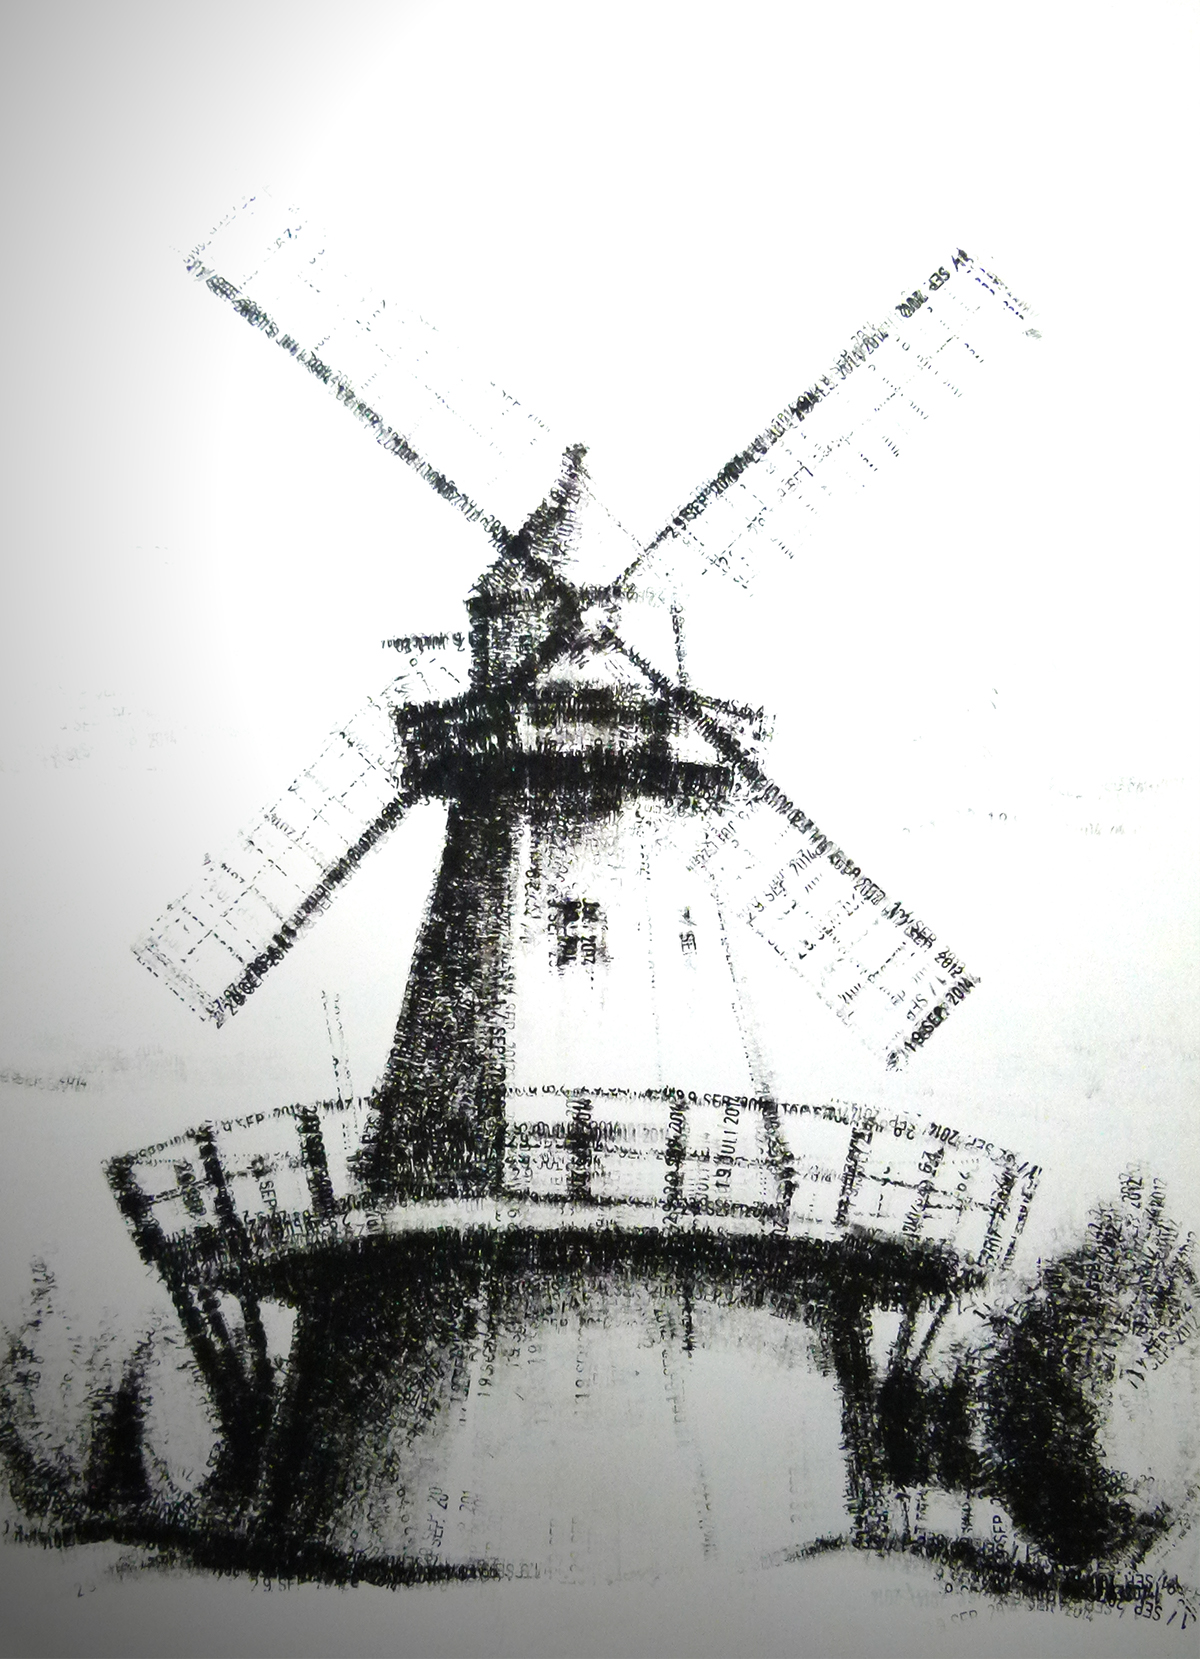 stamp wind mill design techniques